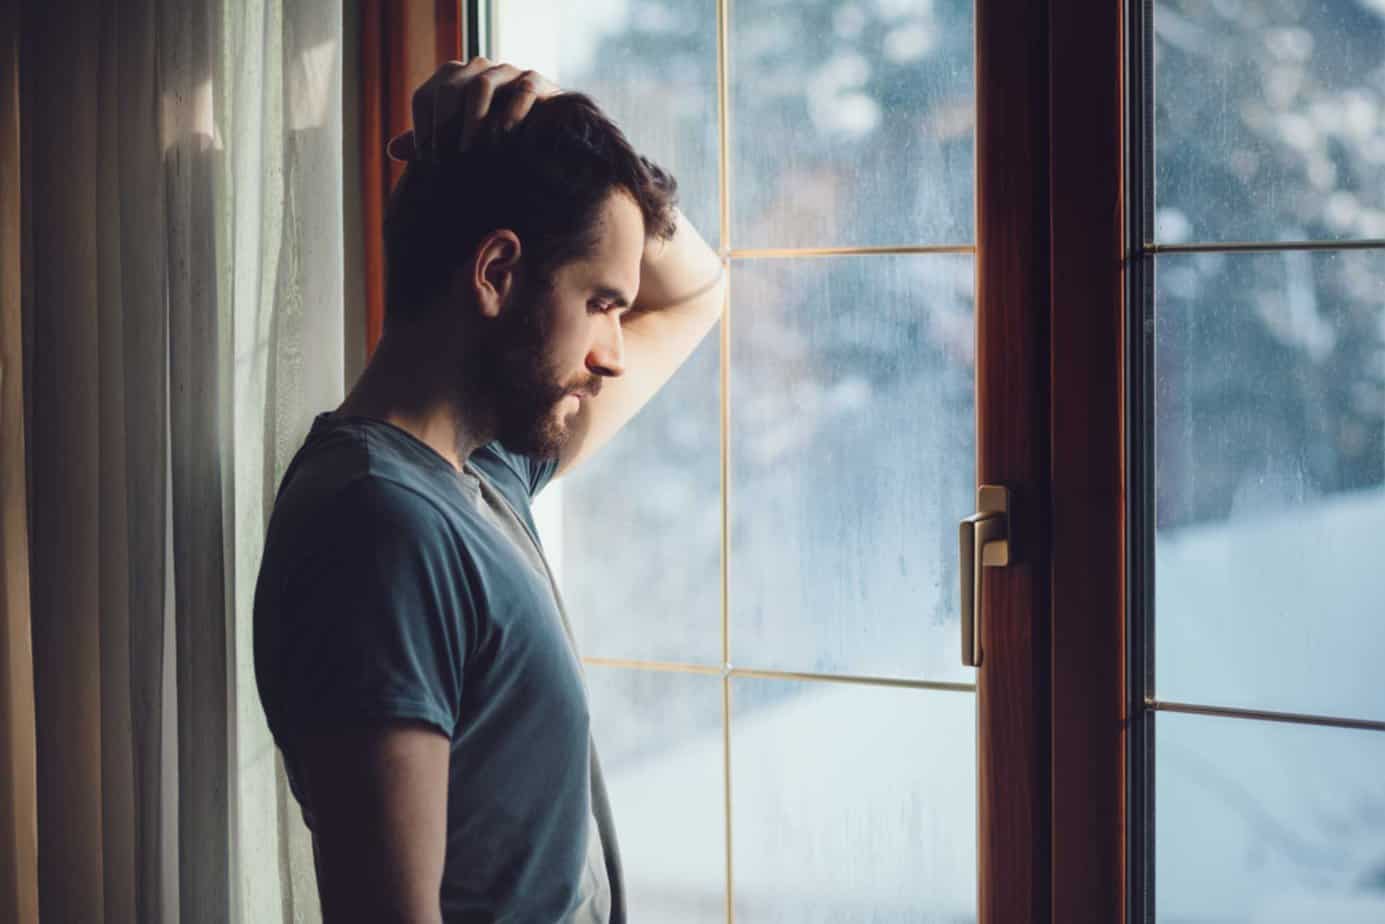 depressed man looking out the window holding his head